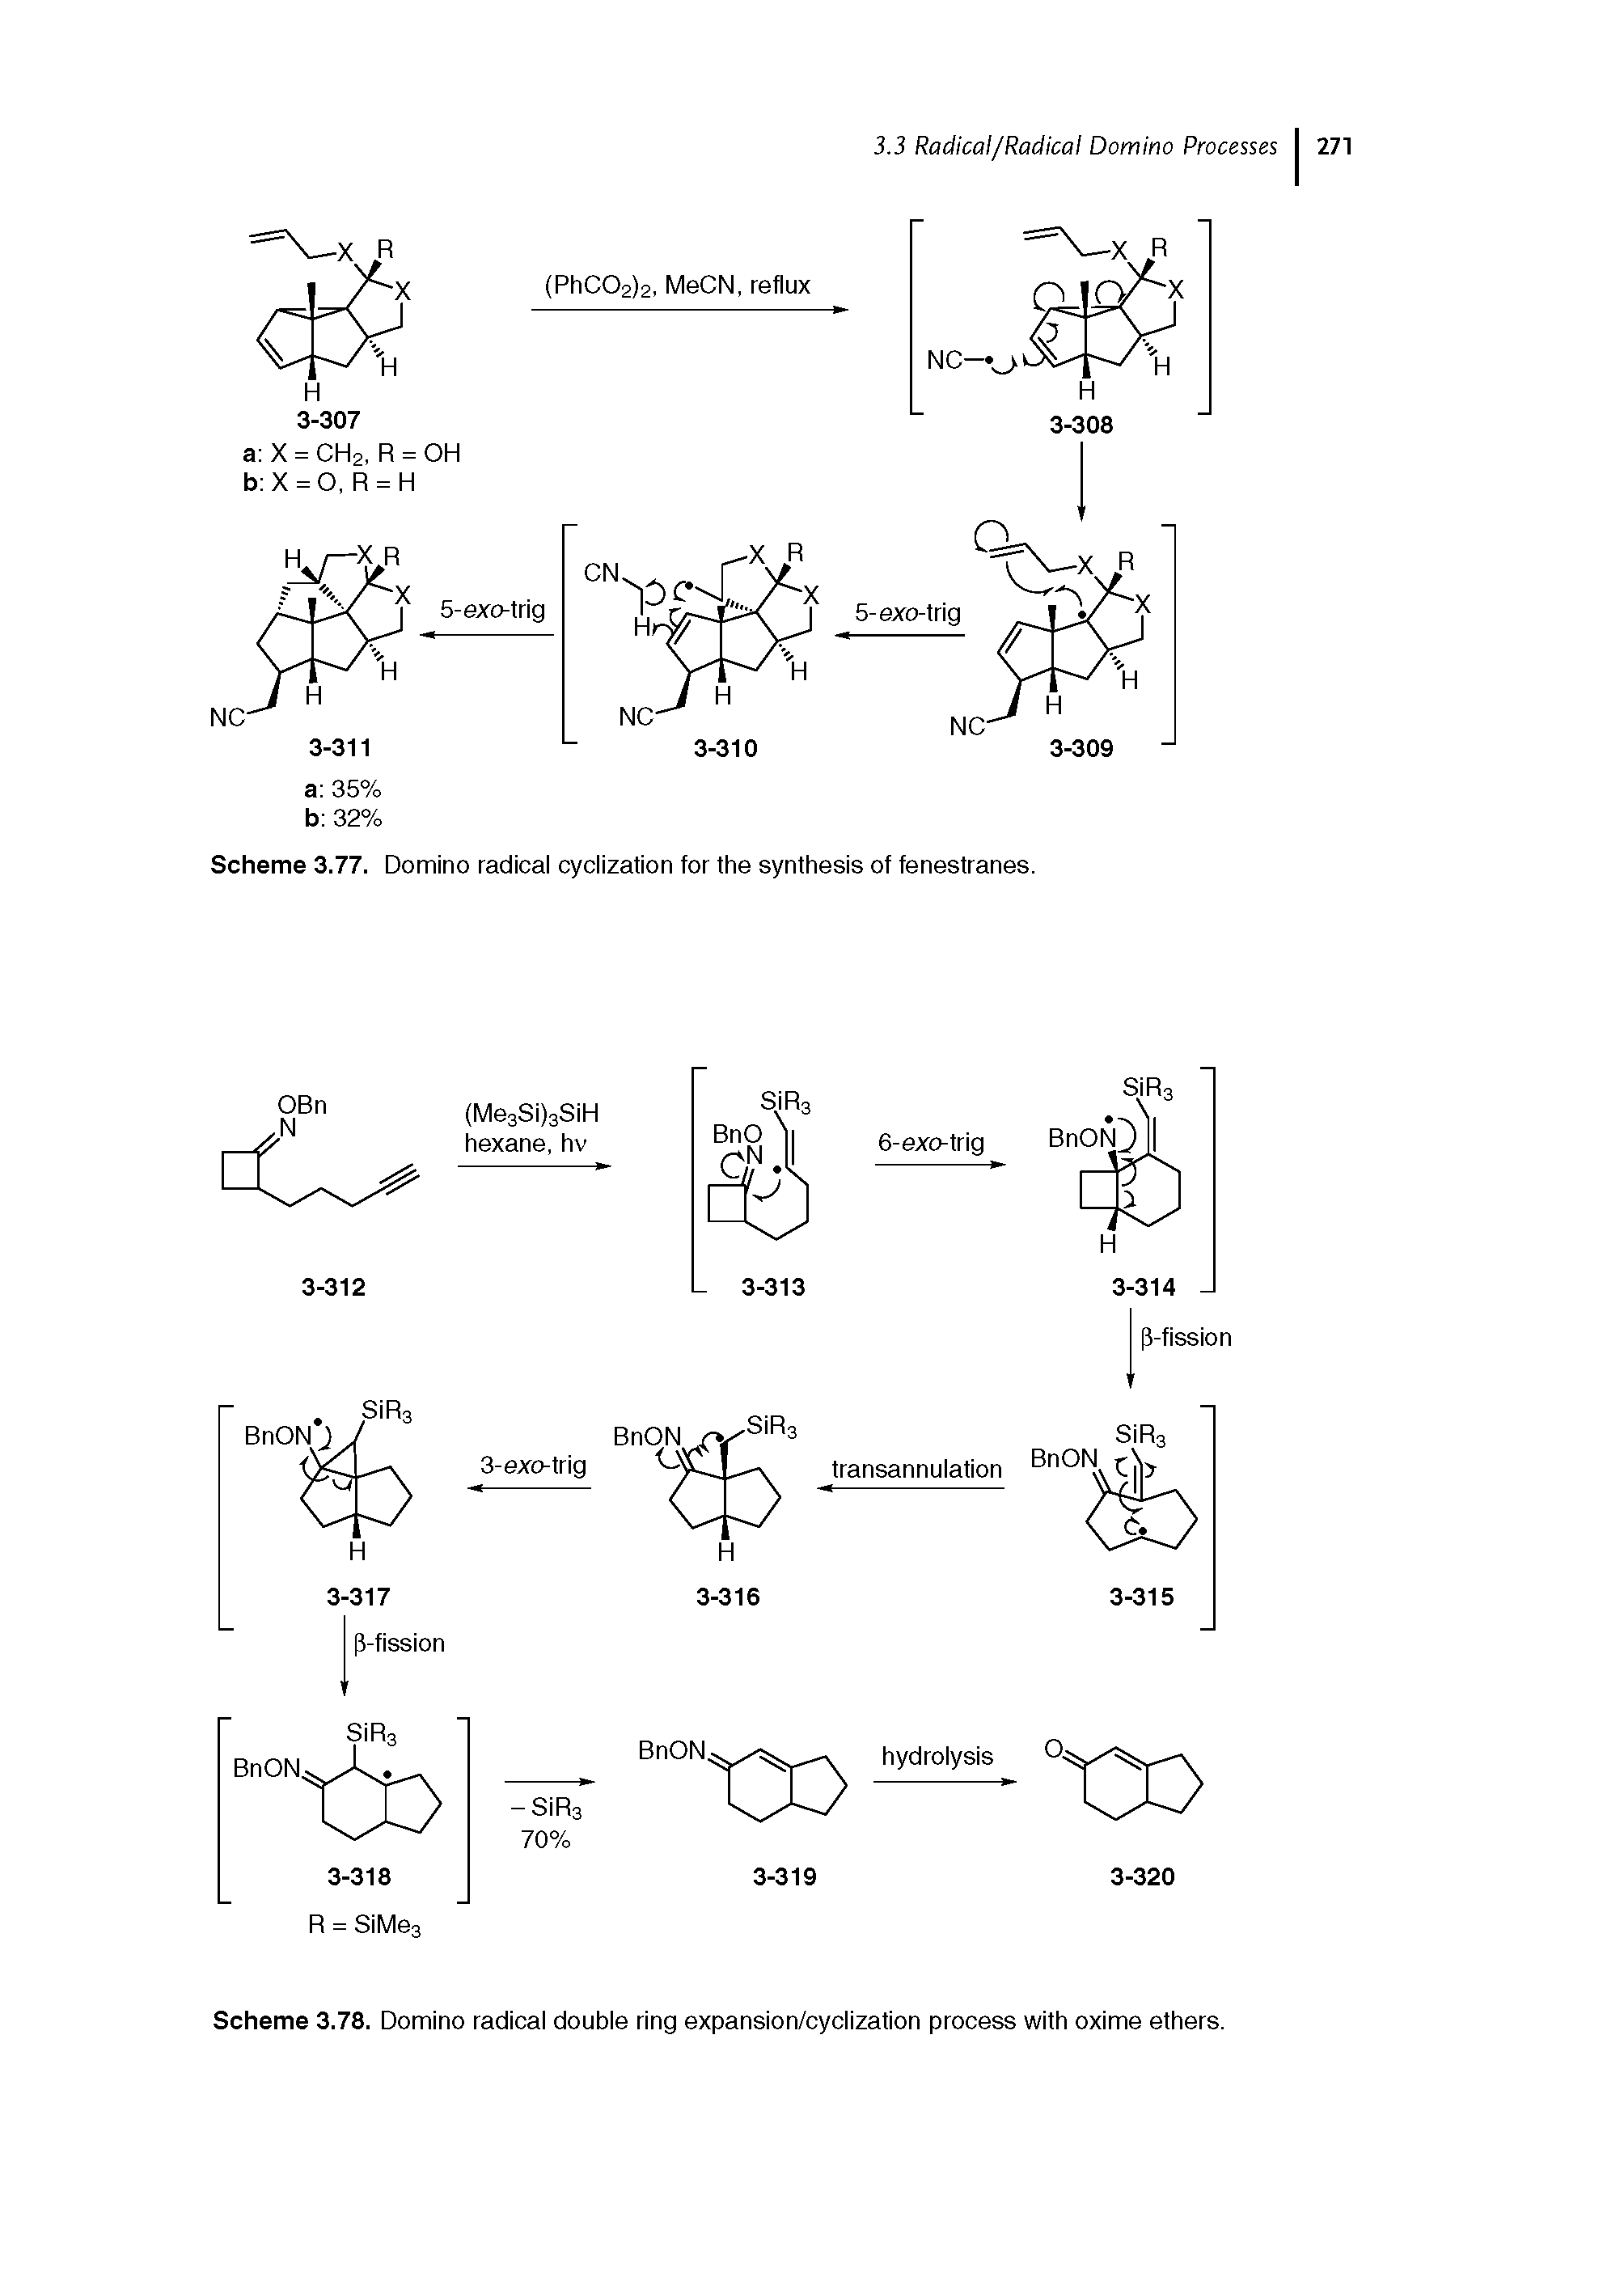 Scheme 3.77. Domino radical cyclization for the synthesis of fenestranes.